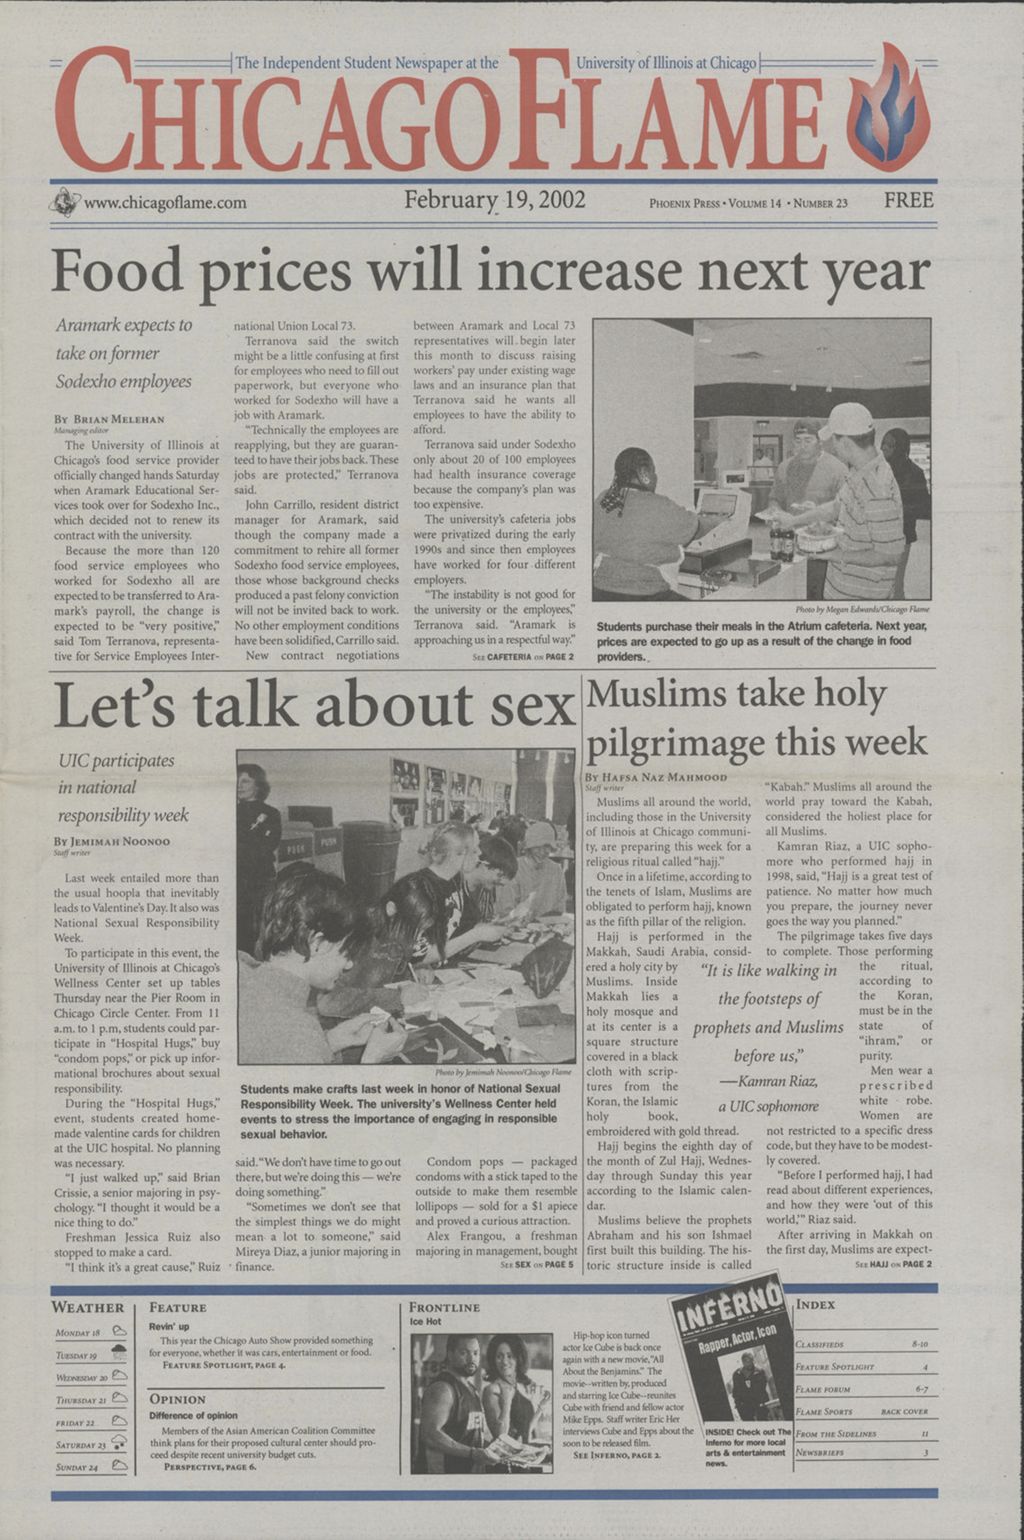 Chicago Flame (February 19, 2002)